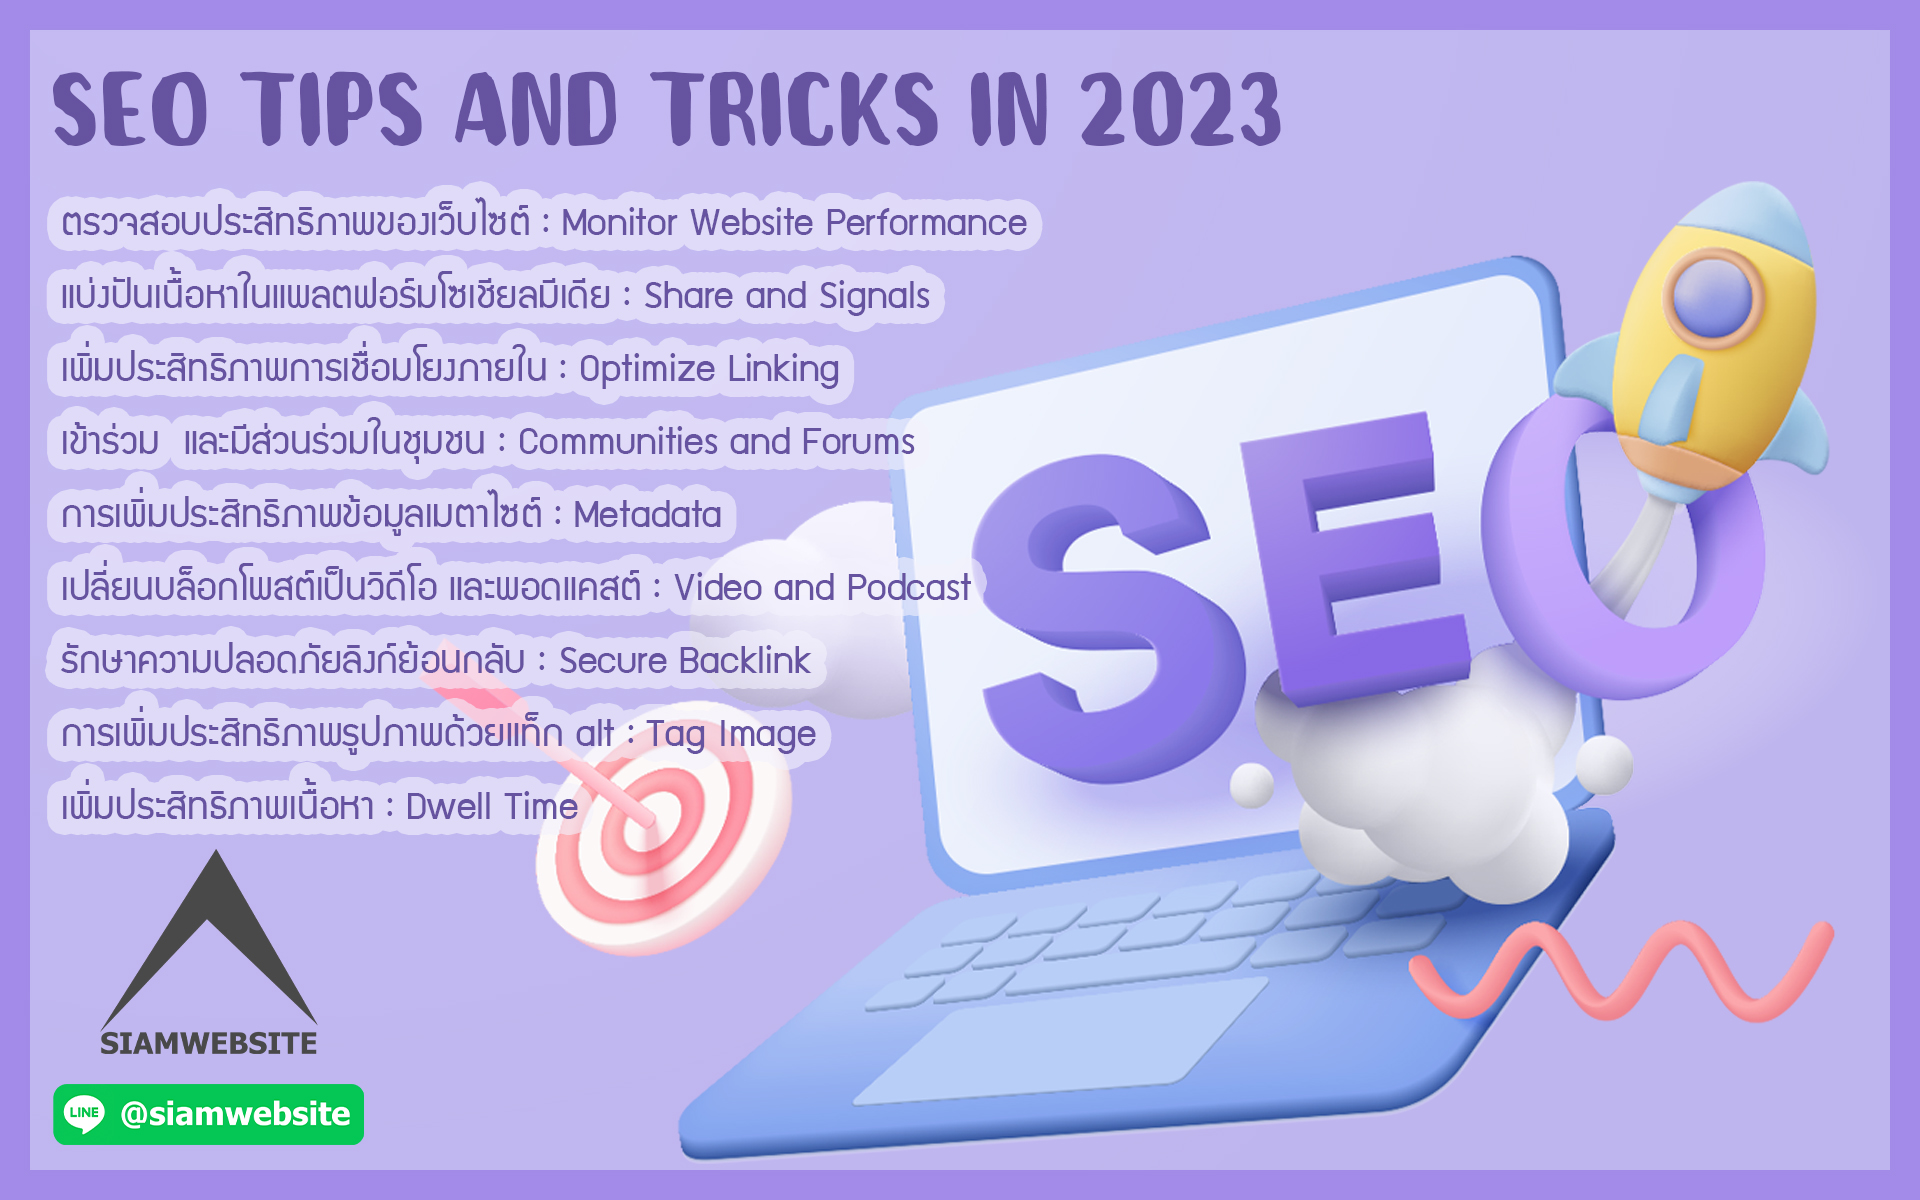 SEO TIPS AND TRICKS IN 2023